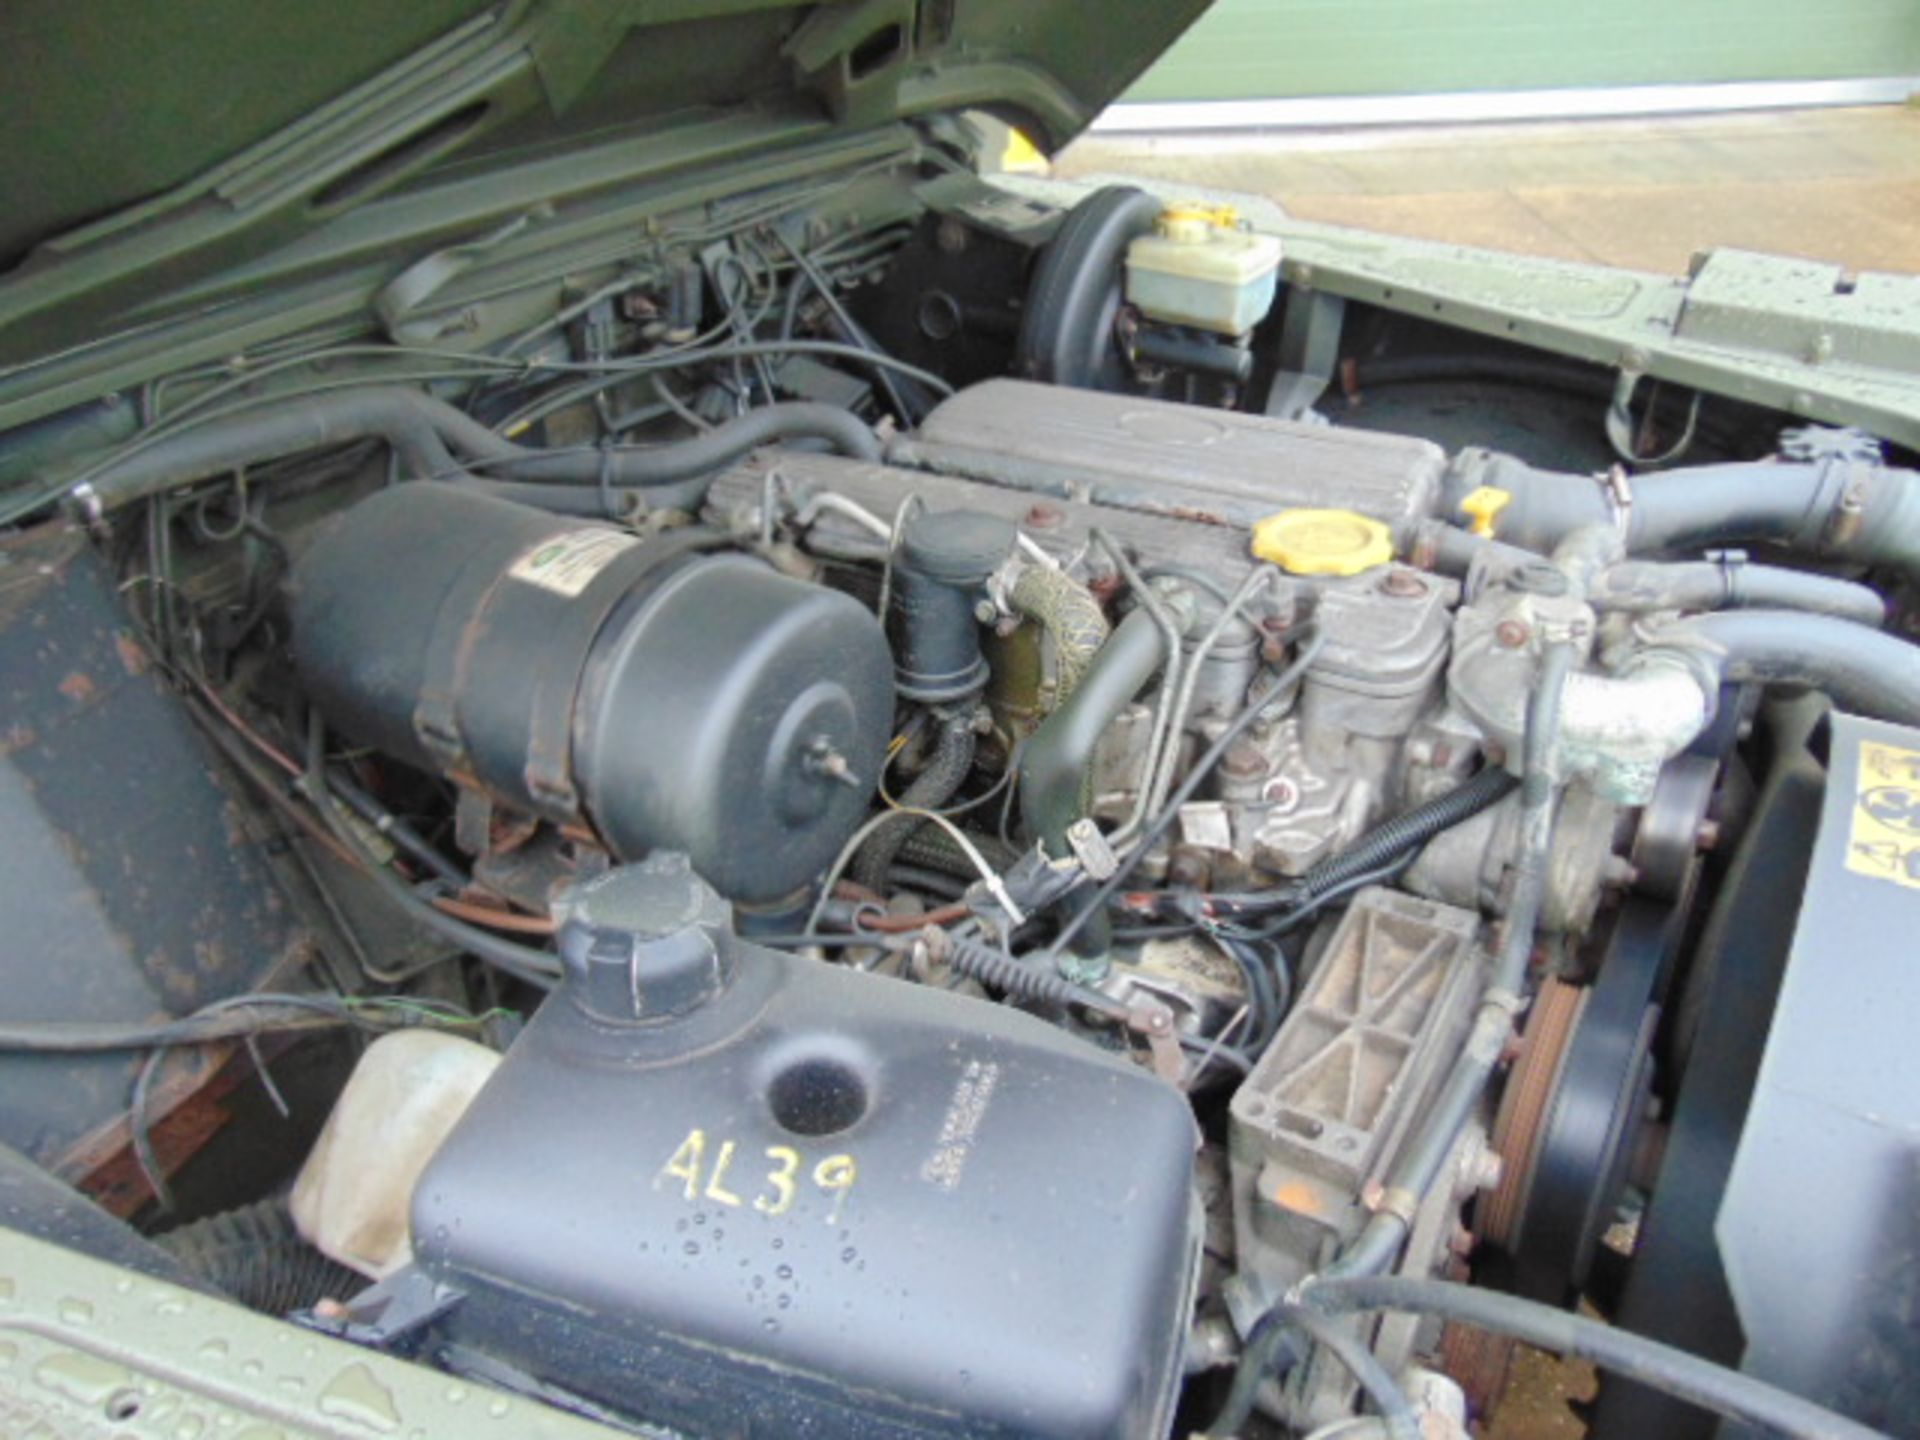 Military Specification Land Rover Wolf 110 Hard Top Left Hand Drive - Image 16 of 25